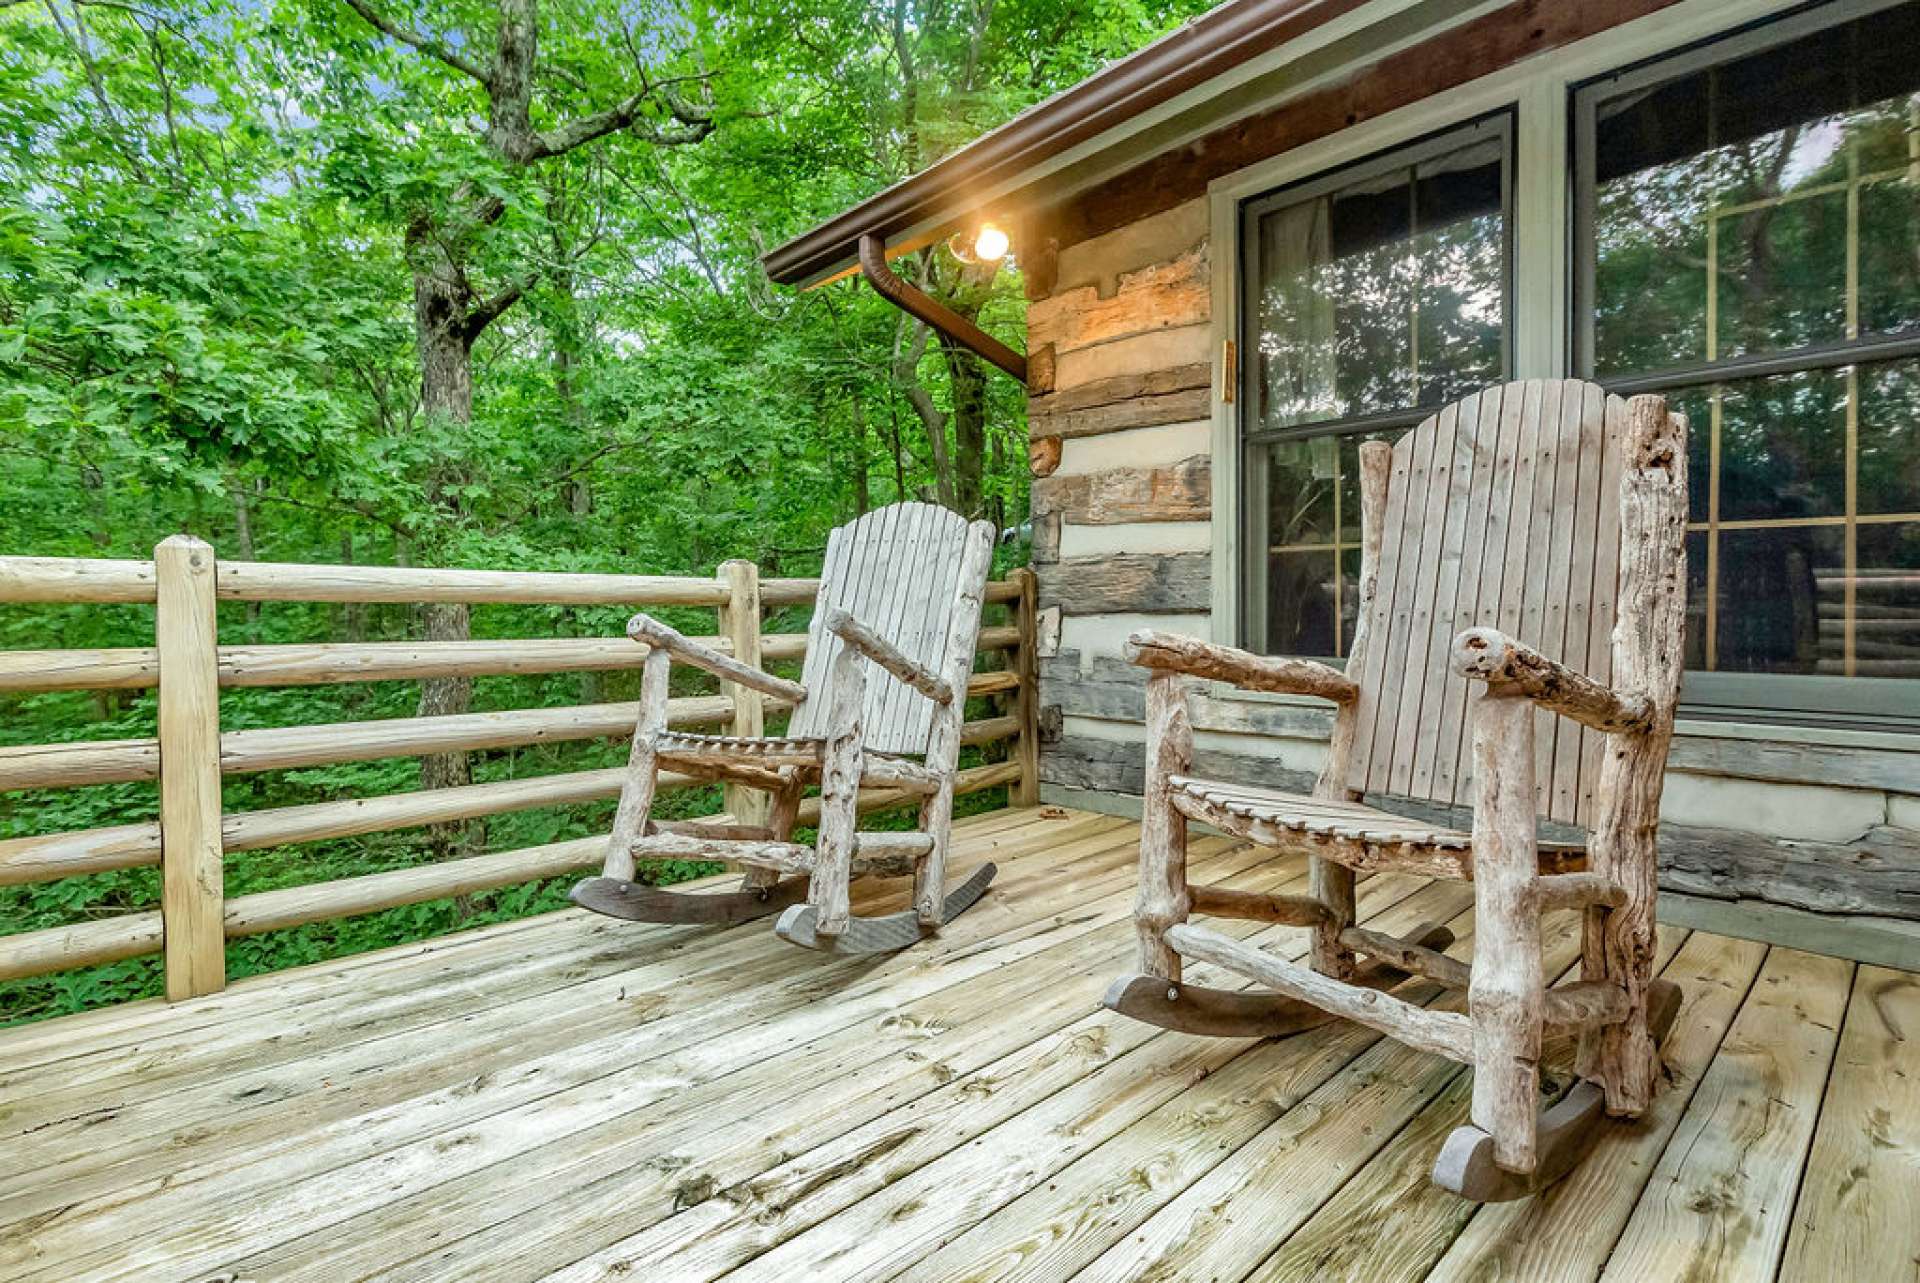 The open back deck offers privacy and is the prime spot for listening to the birds.